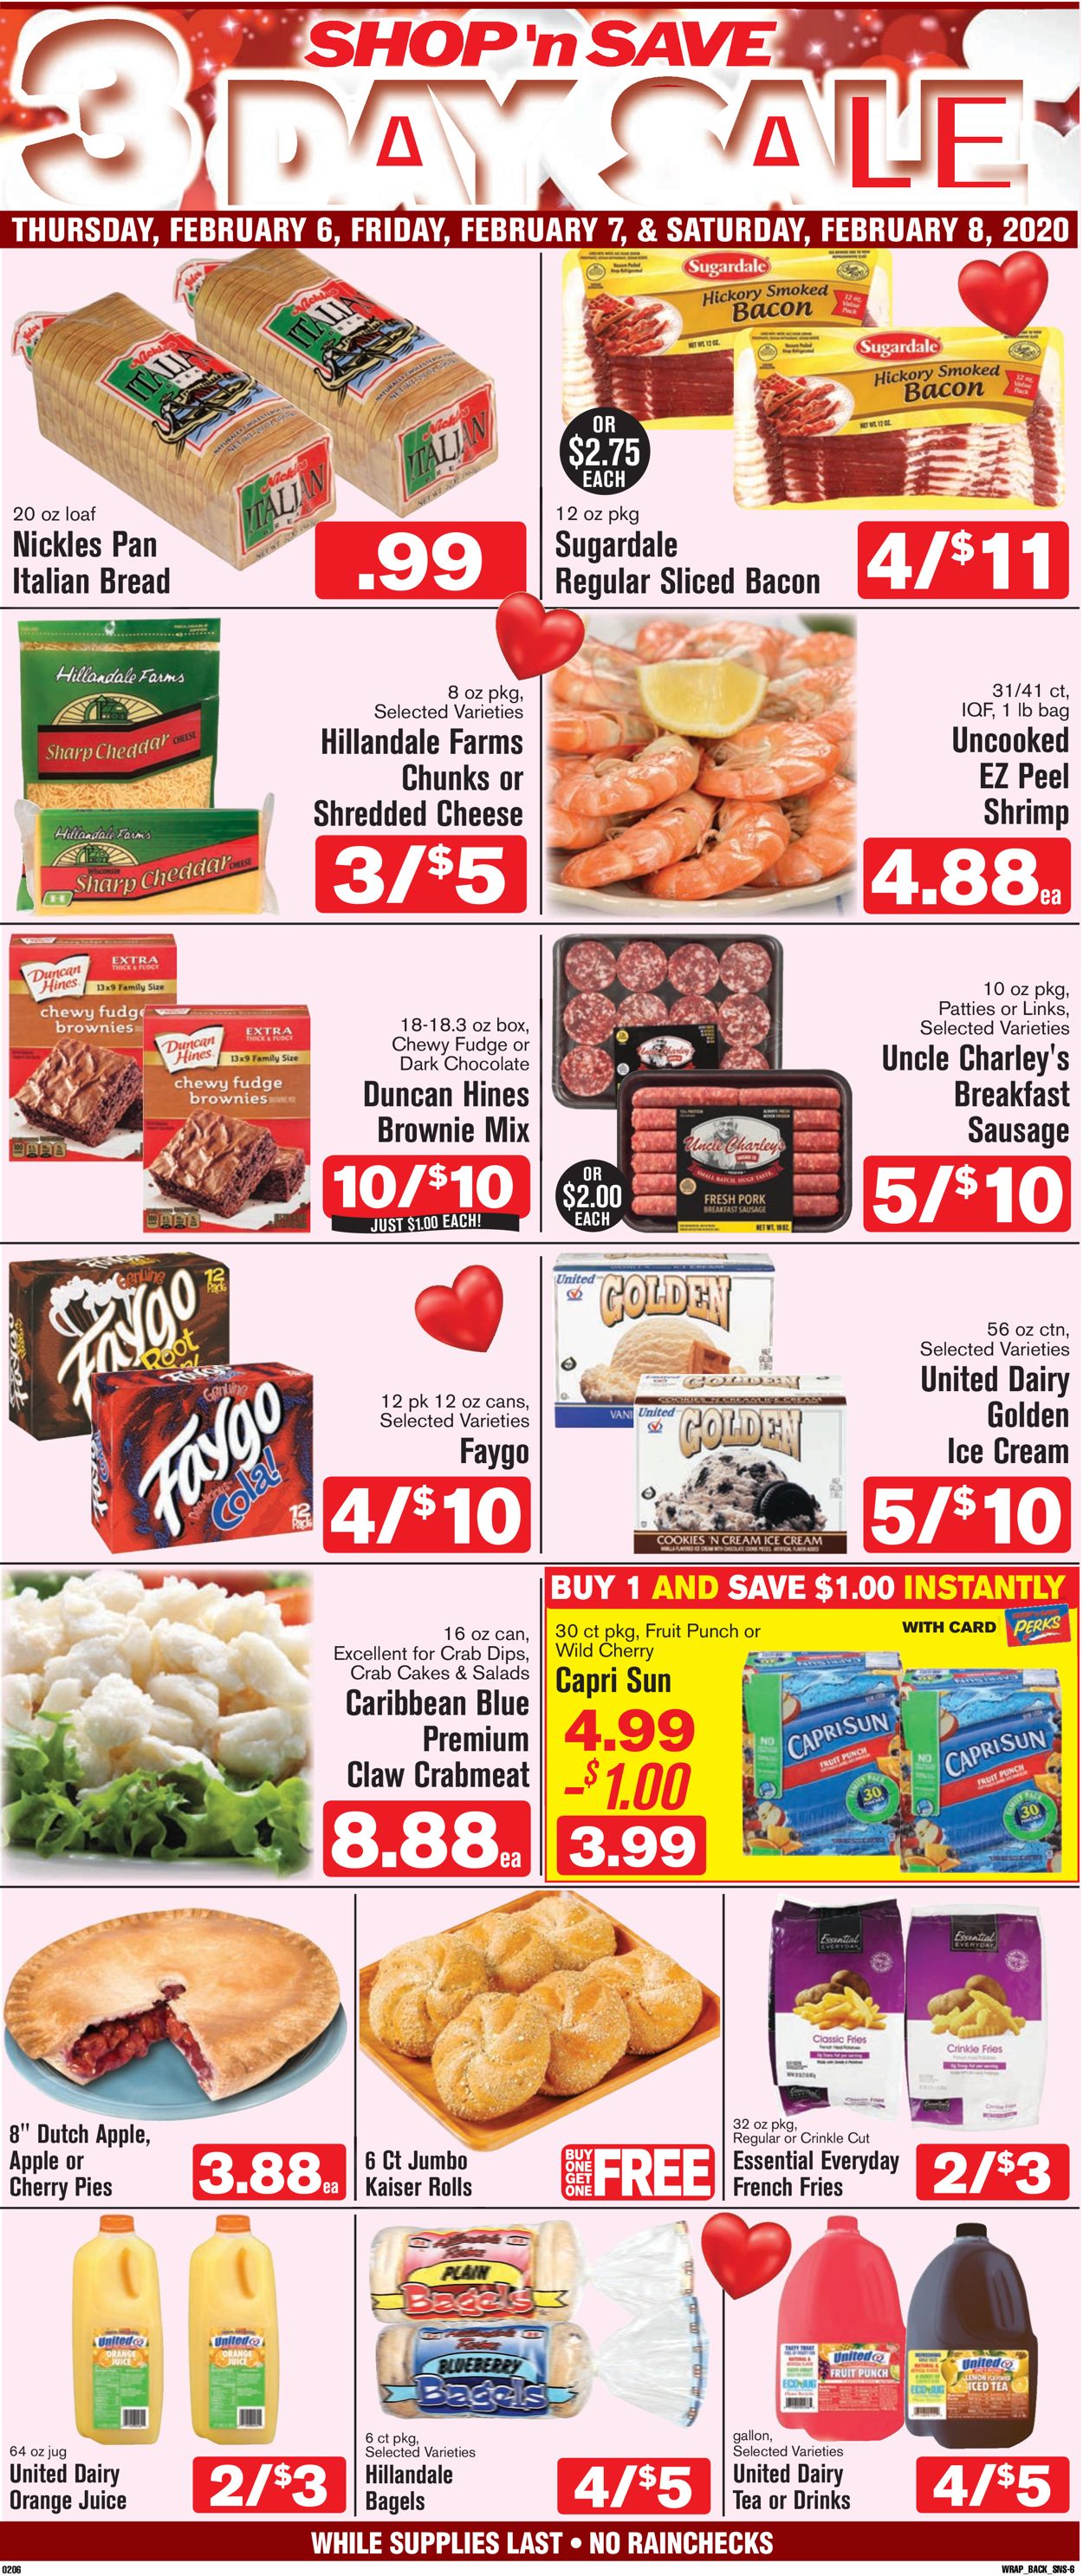 Shop ‘n Save Current weekly ad 02/06 - 02/08/2020 [2] - frequent-ads.com